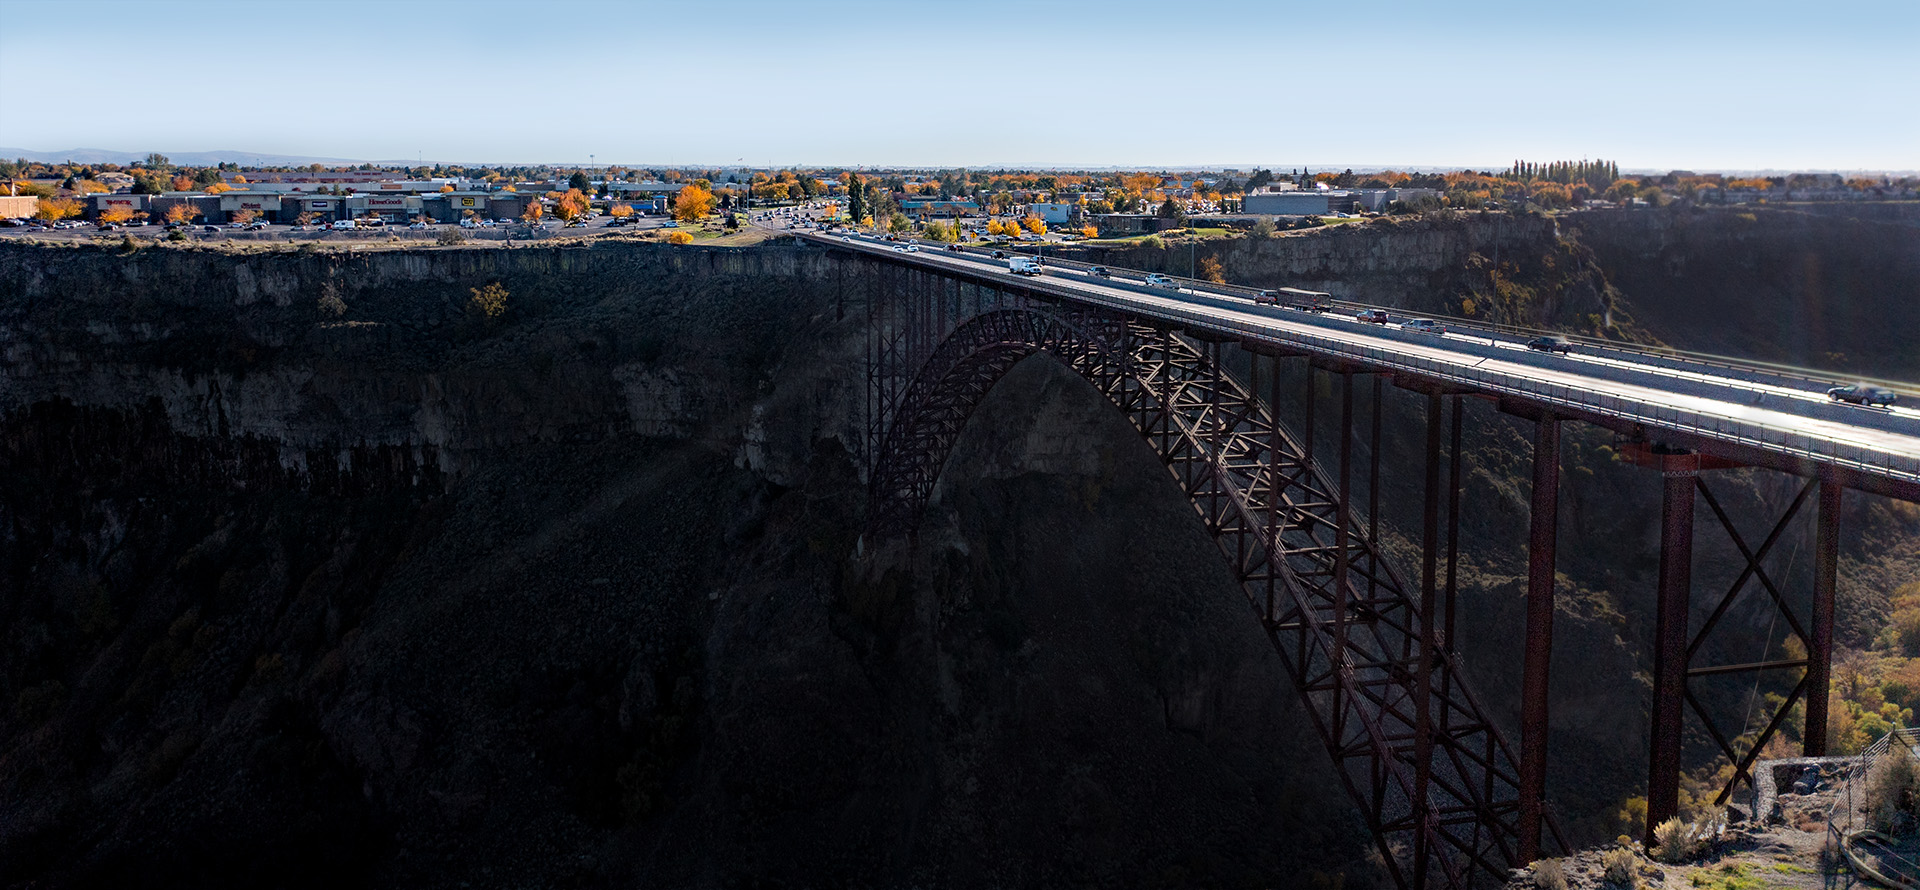 Overlooking the Snake river canyon and bridge onto the economically booming city of Twin Falls